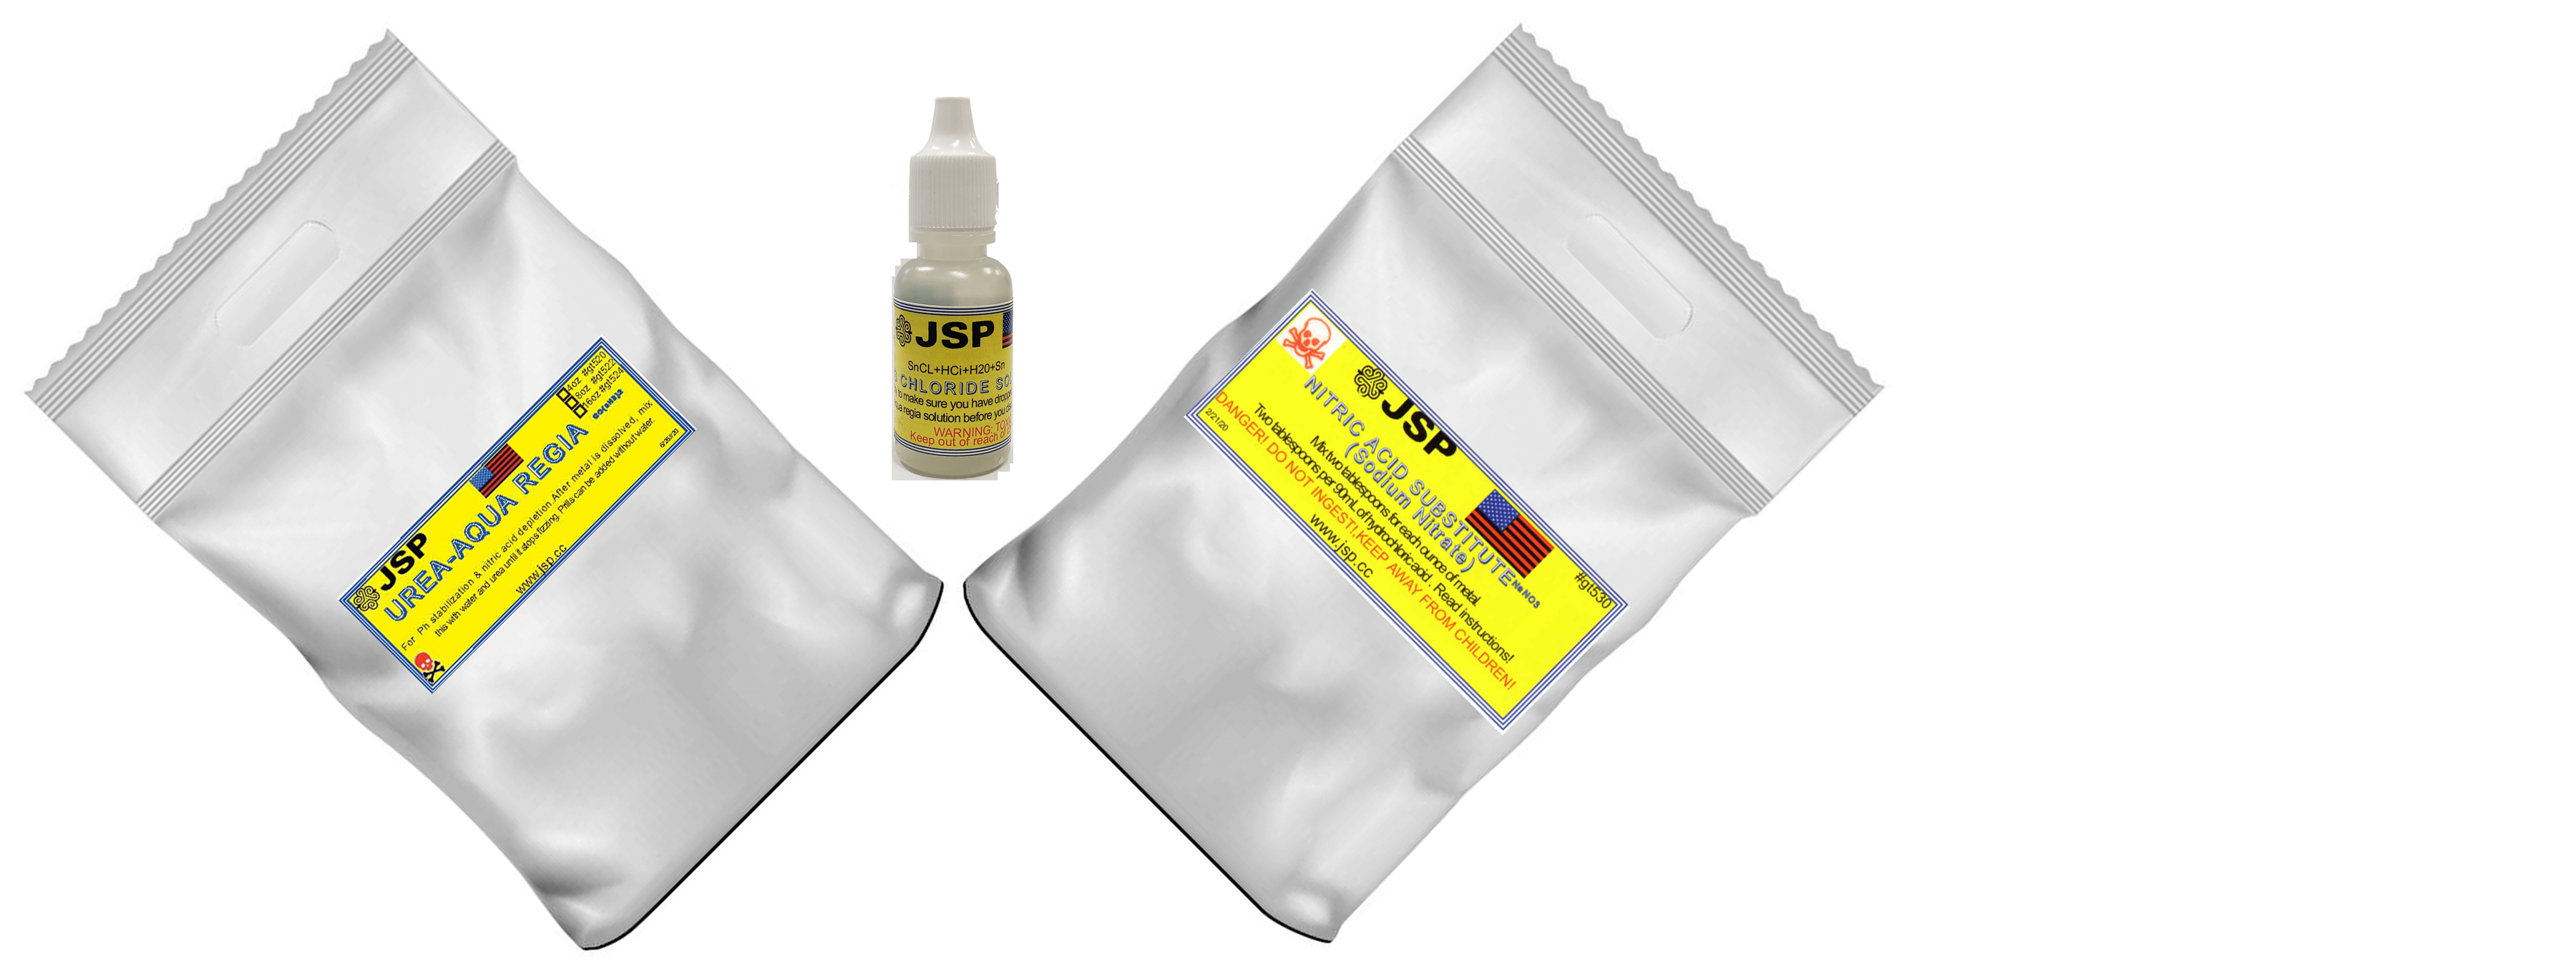 Aqua regia gold refining supply kit, 2x 1/2lb bags +Stannous Chloride with instructions.